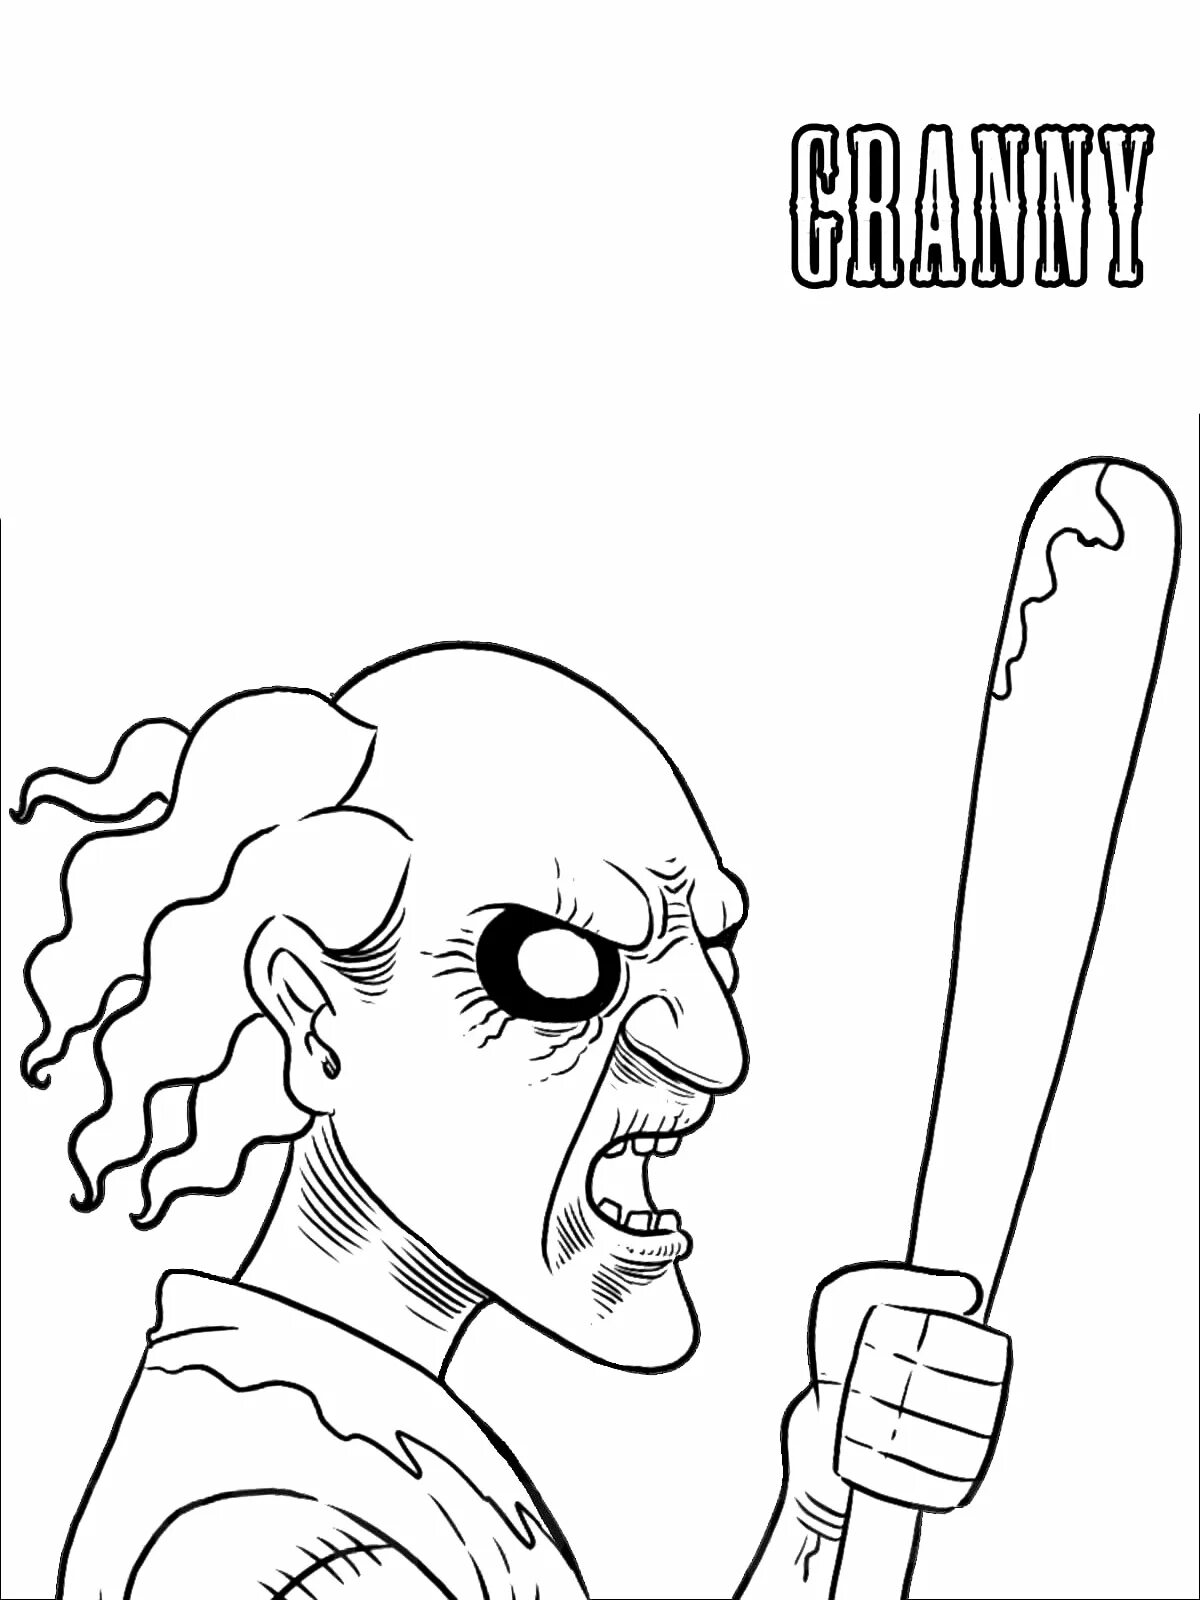 Animated grandmothers coloring page